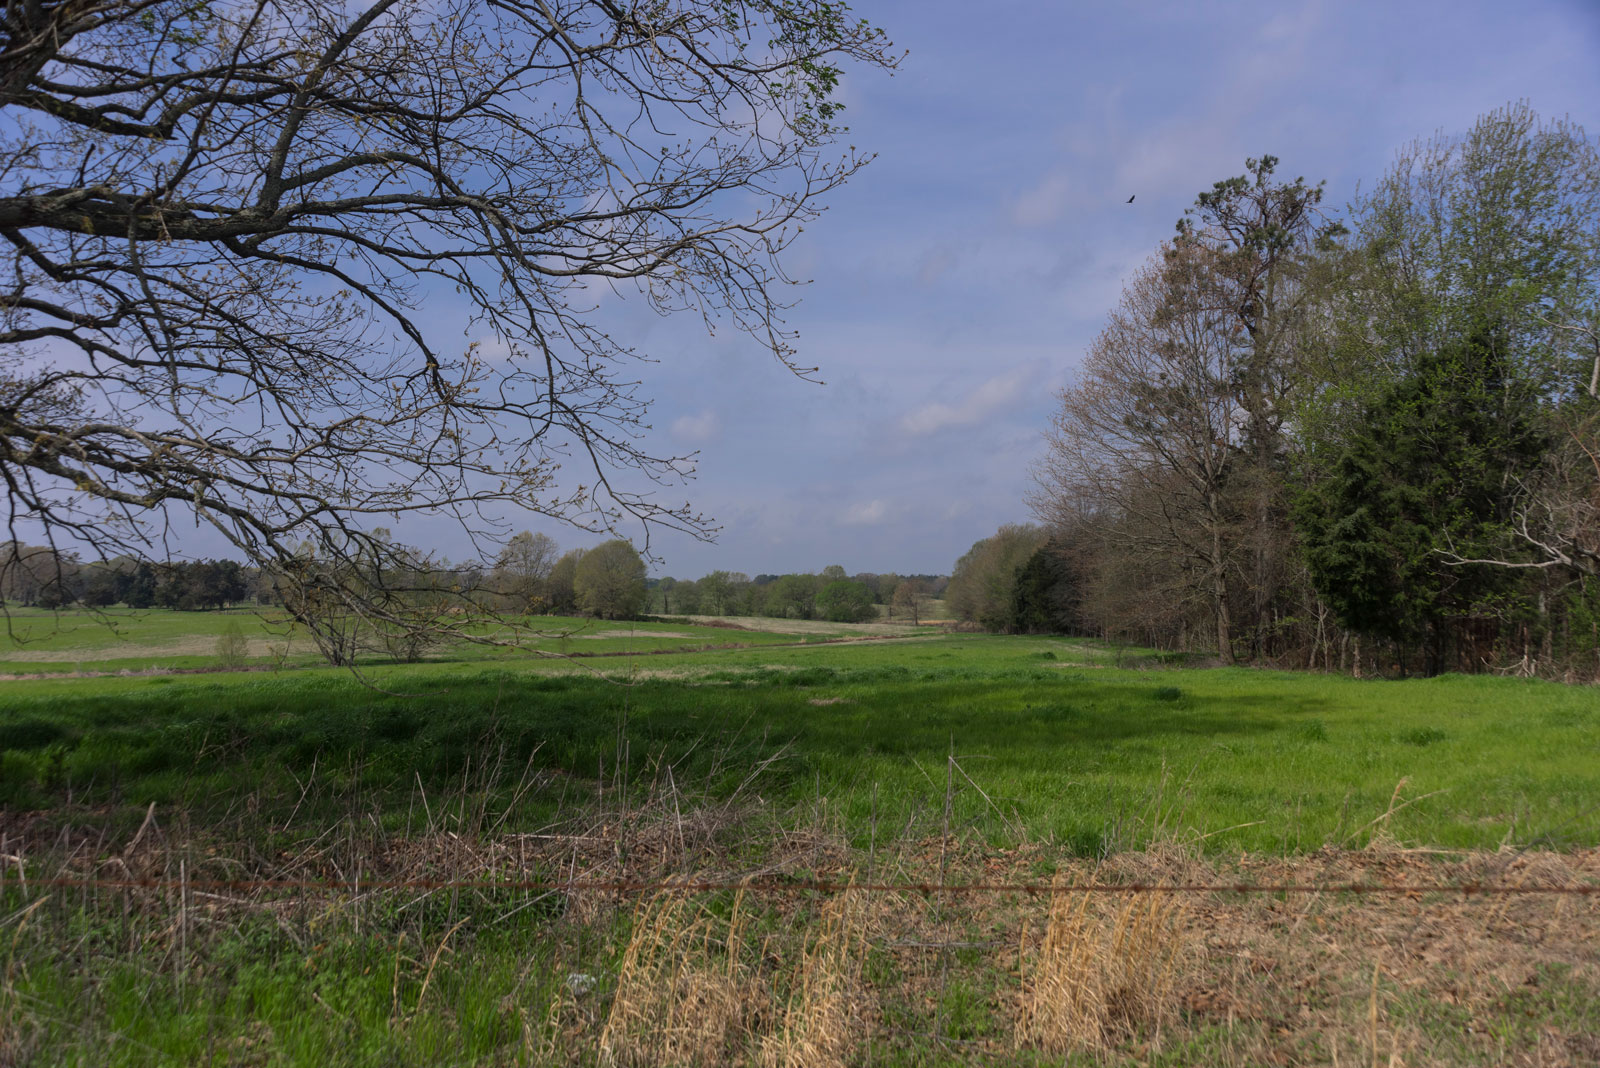 A flat, grassy field with trees in the background.